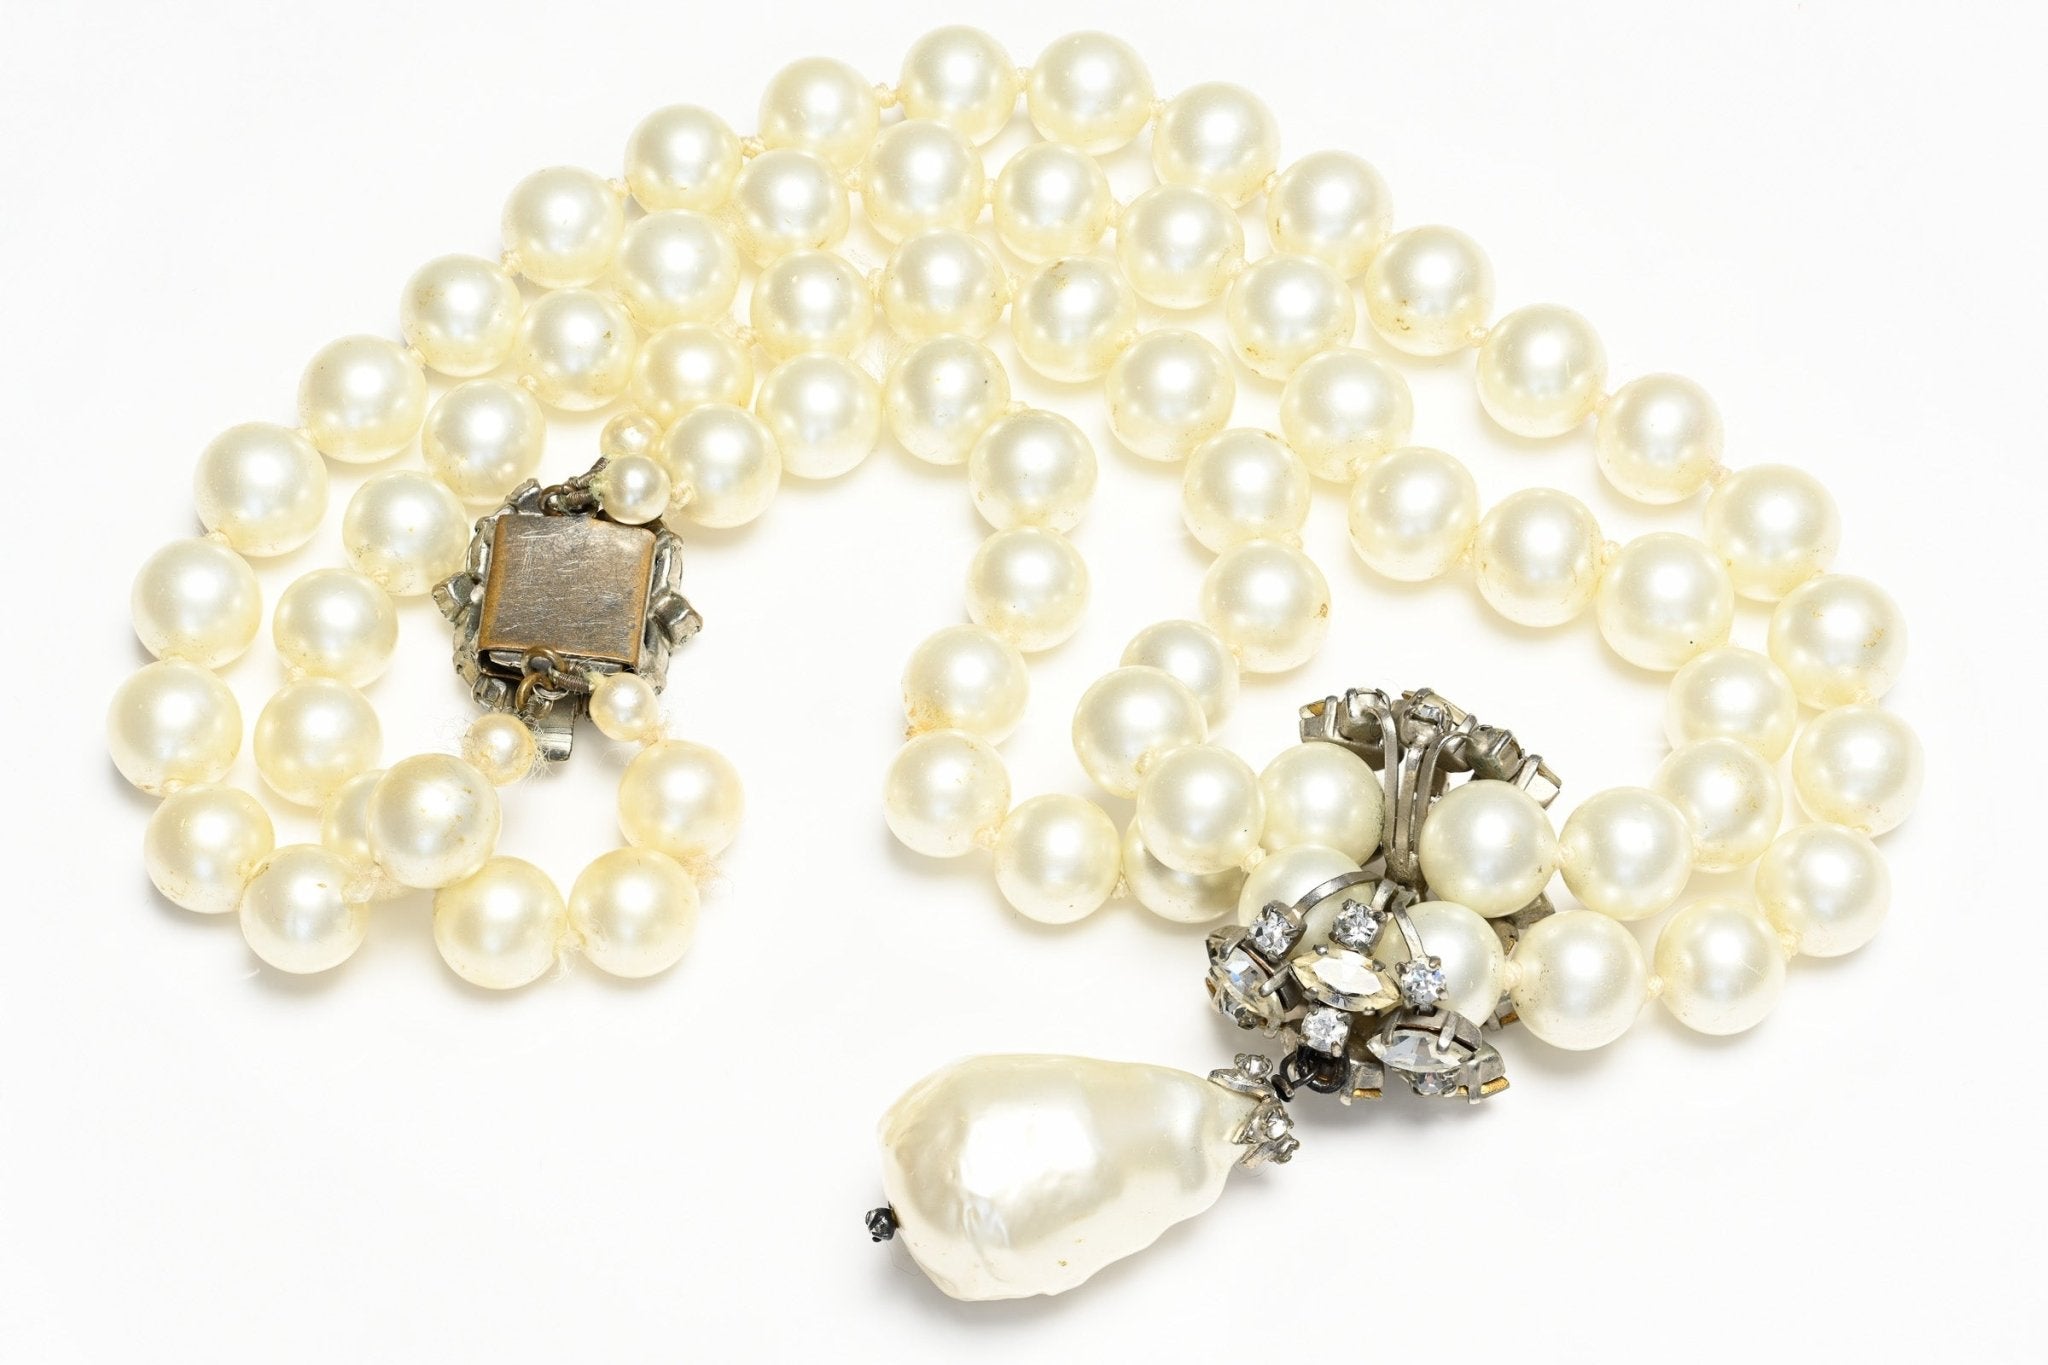 Vintage 1950's Christian Dior Paris Couture Roger Jean-Pierre Pearl Crystal Necklace